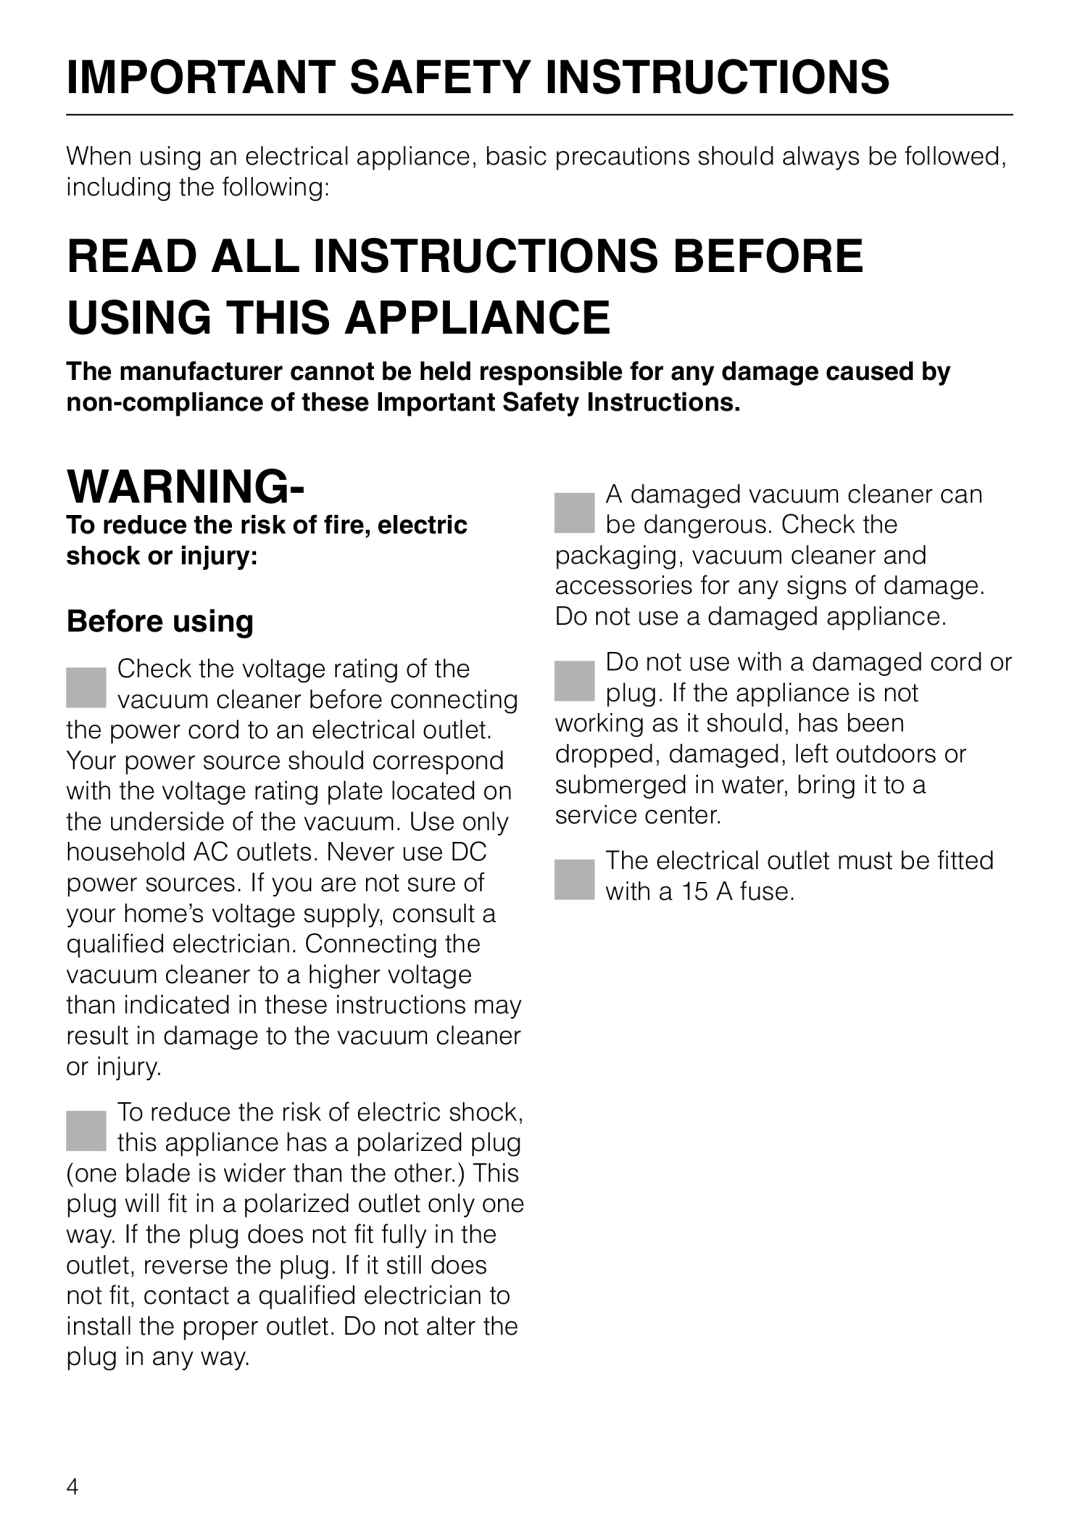 Miele S 5000 Important Safety Instructions, Read All Instructions Before Using This Appliance, Before using 